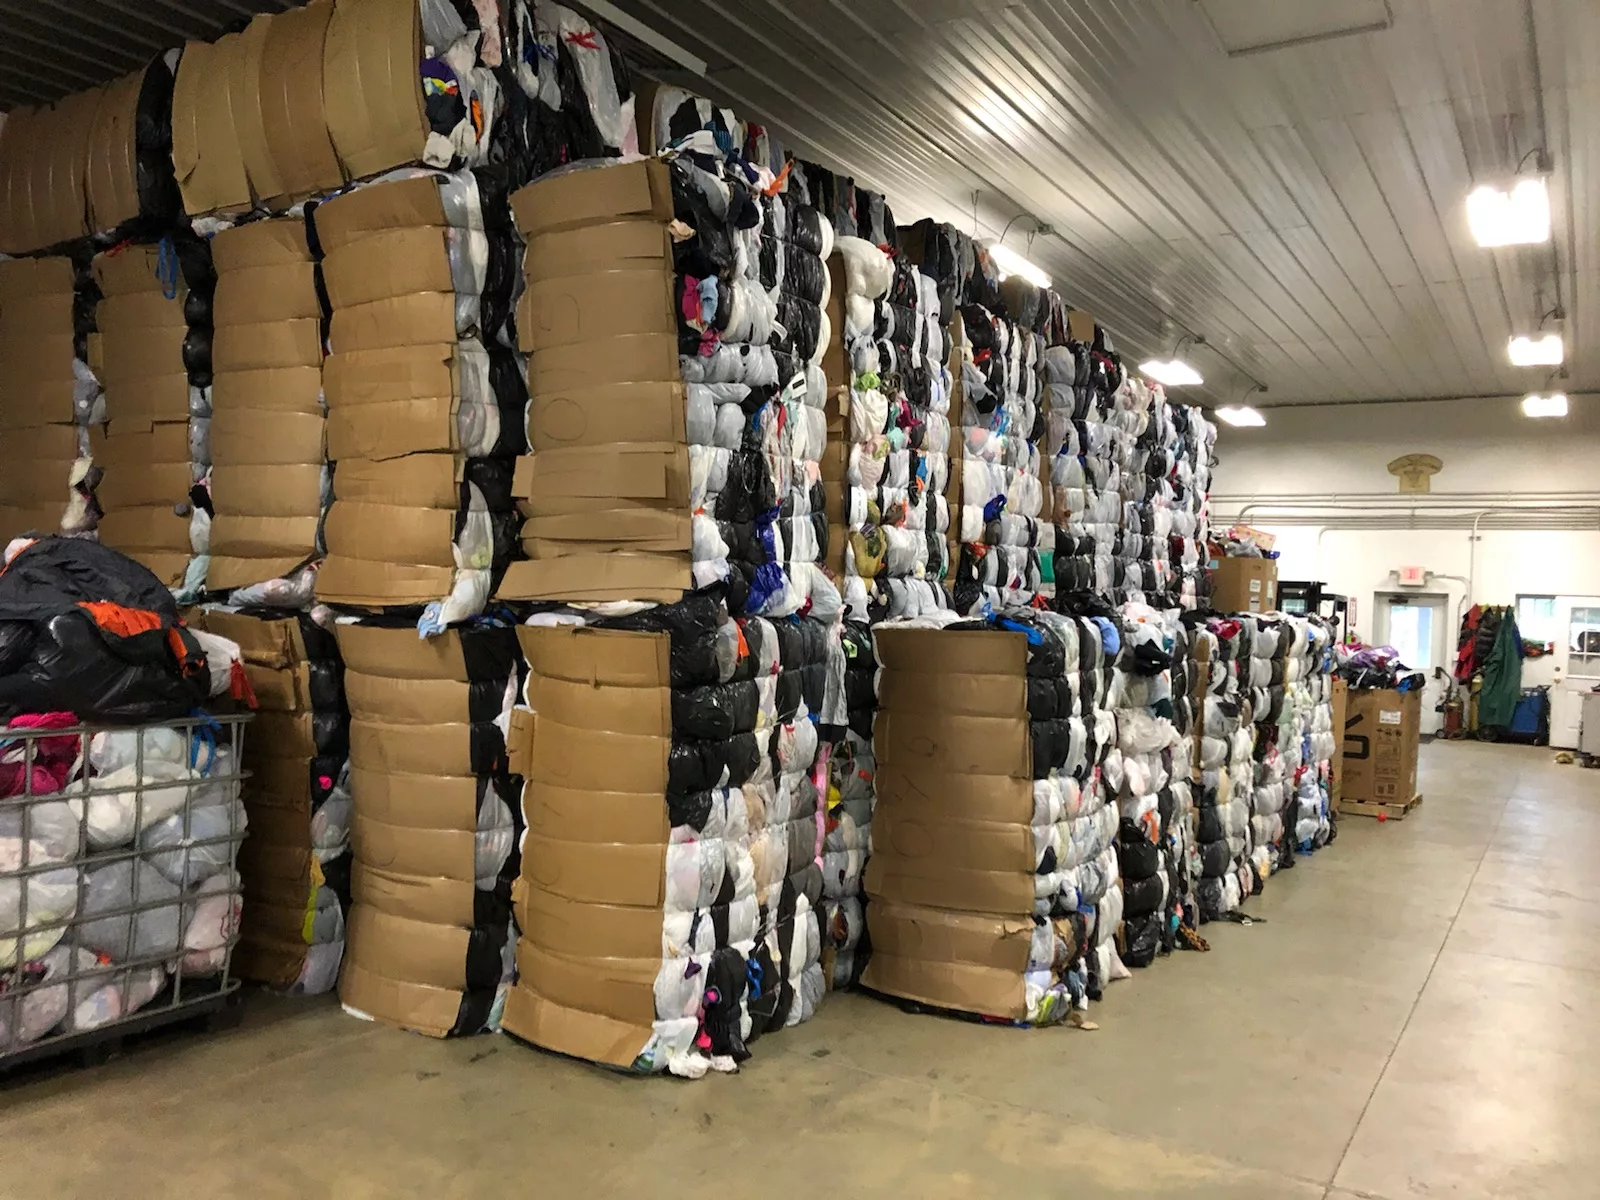 Bales of used clothing